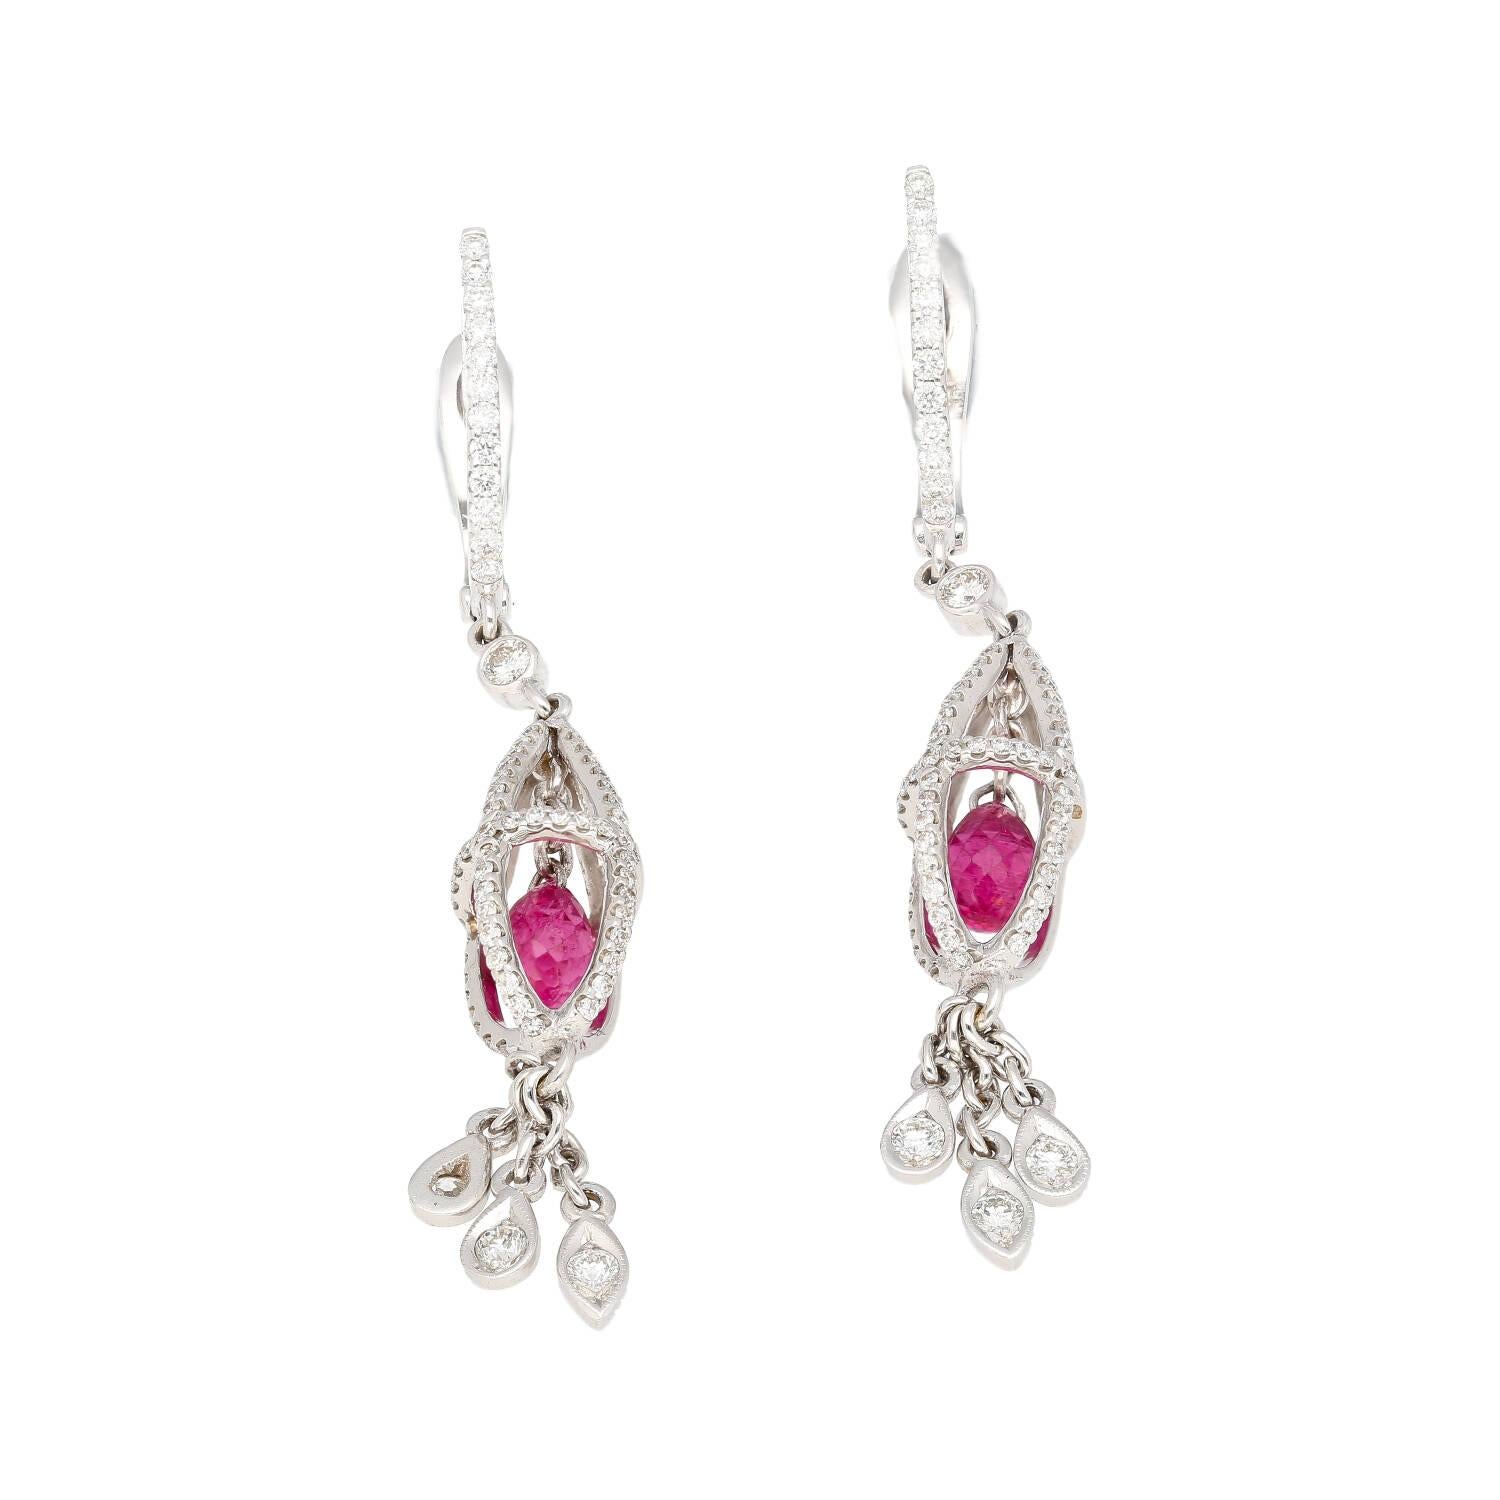 These captivating earrings showcase a 1.40ct total of sparkling checkerboard faceted pear-cut pink sapphire dangling in the center of a cage motif drop earring. Crafted in lustrous 18k white gold and secured with comfortable lever back closure.